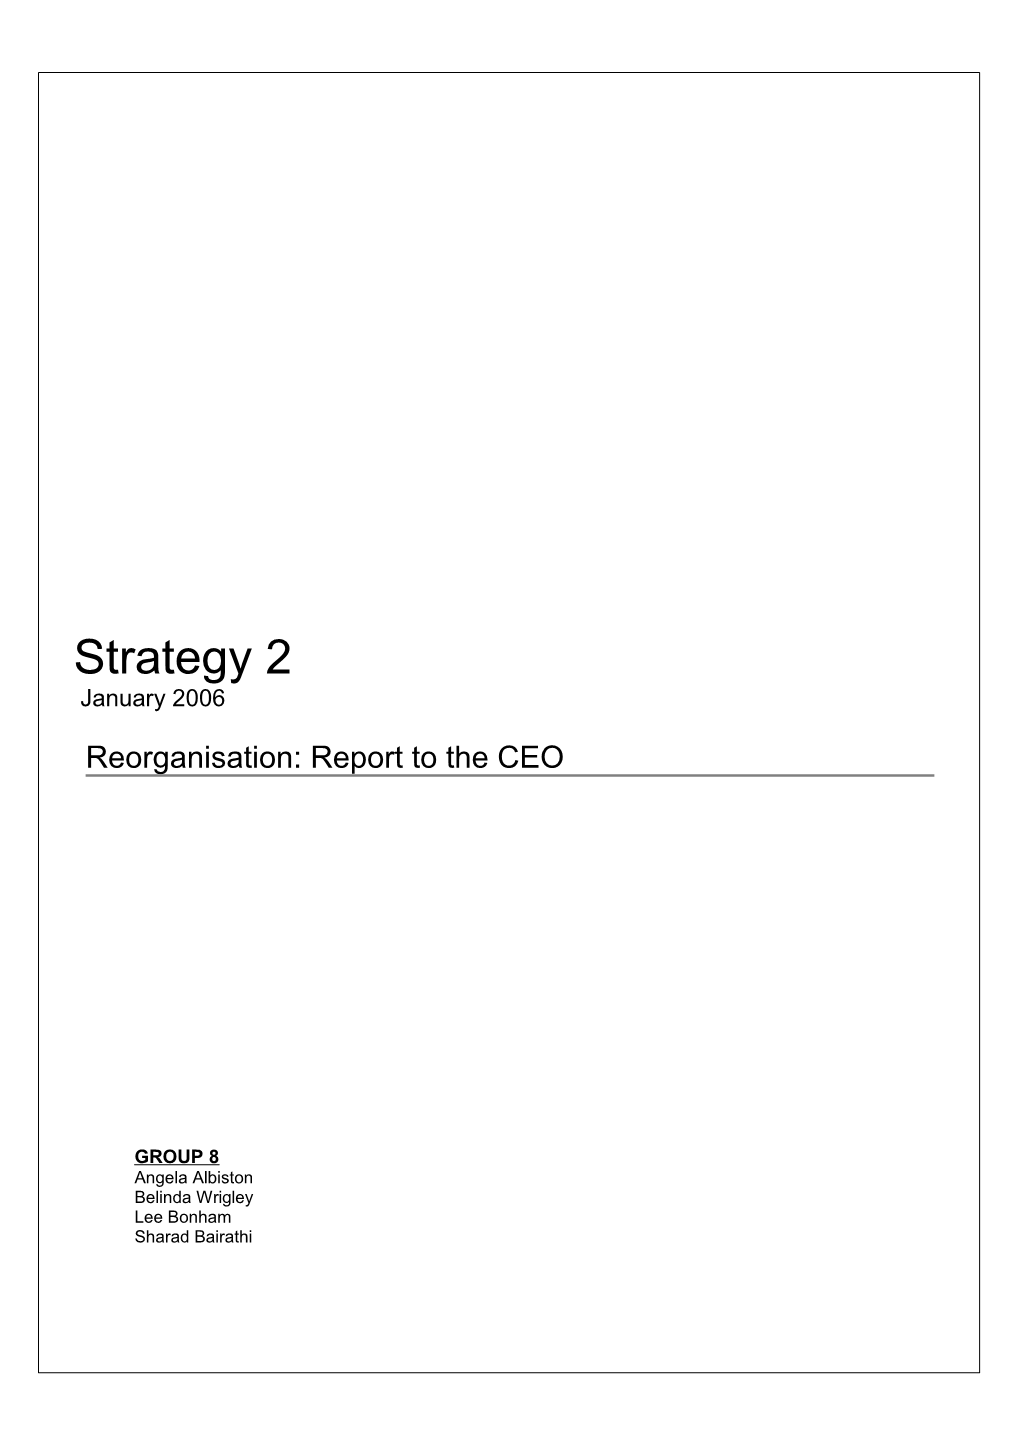 Reorganisation: Report to the CEO